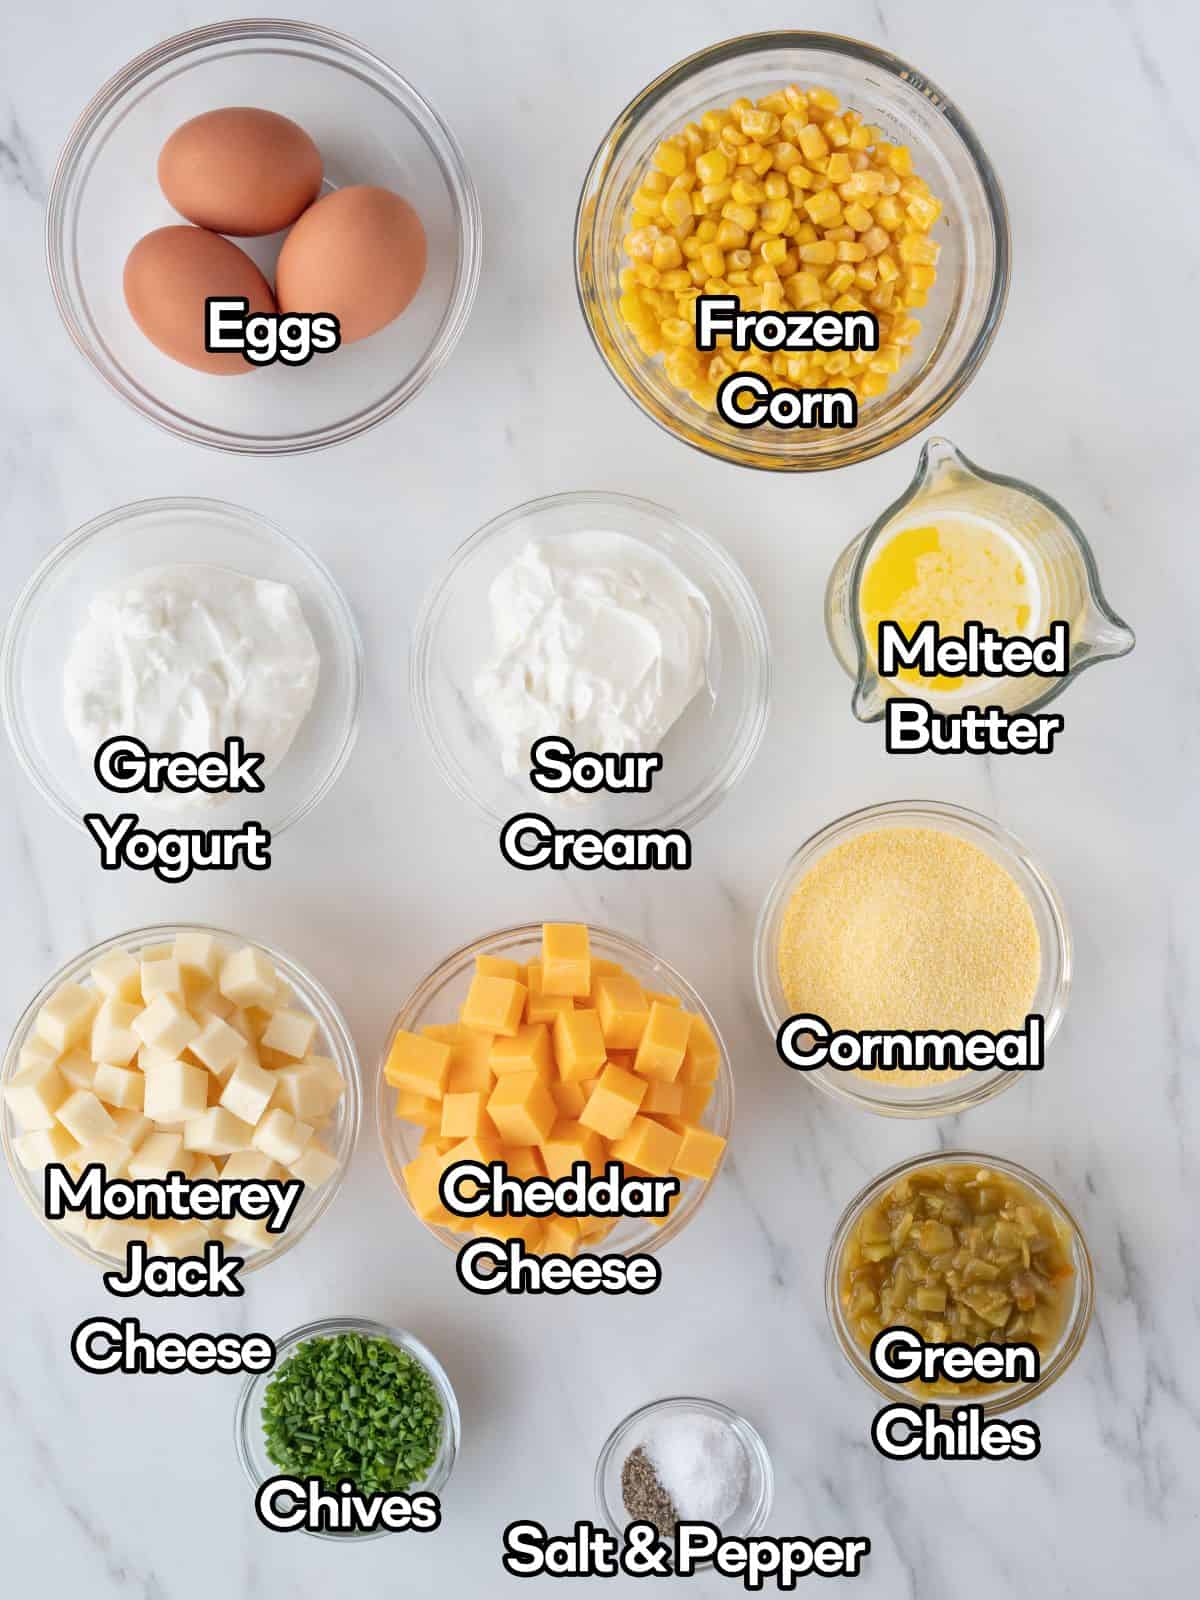 Mise-en-place of all the ingredients to make corn soufflé.